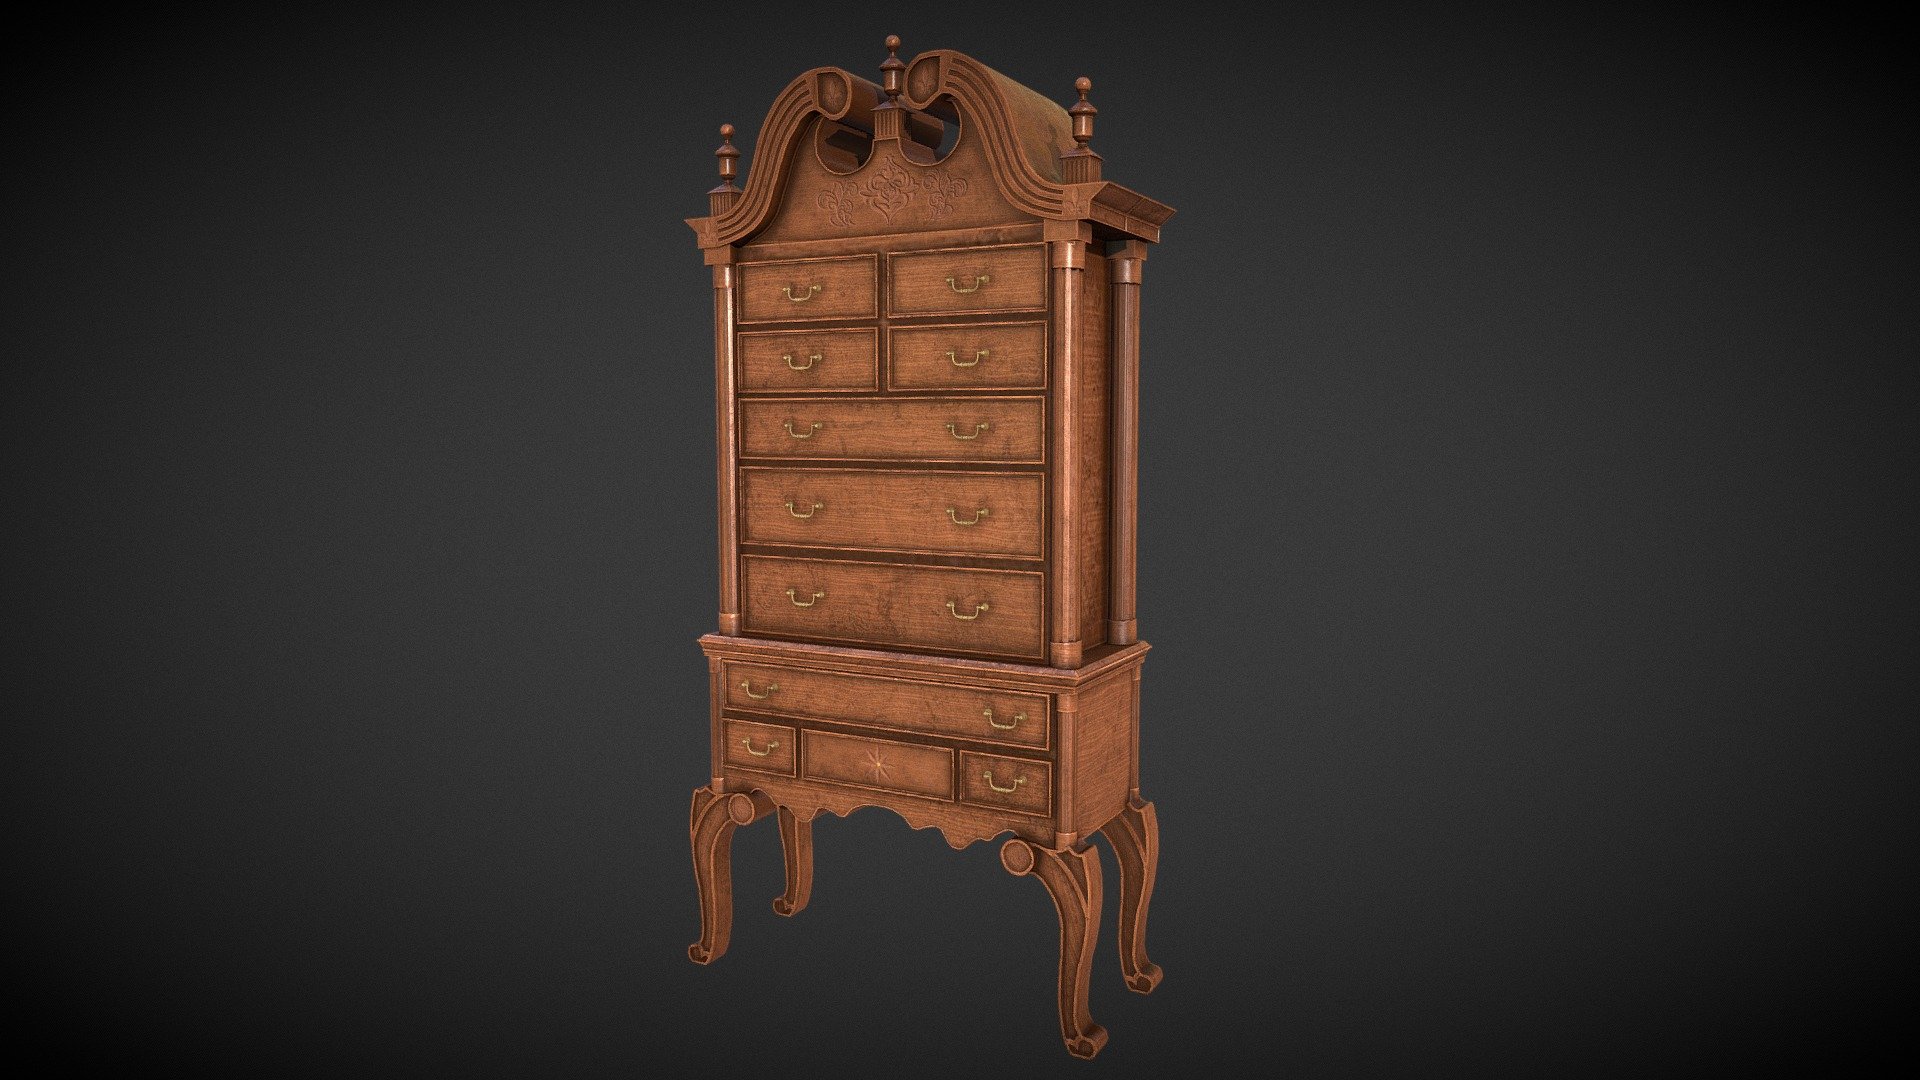 a Victorian piece of furniture inspired by Thomas Affleck's designs. 
Credit: Alpha designs was done by Beryl Van Ness https://www.artstation.com/artwork/e0e98J - Victorian Chest of Drawers - Buy Royalty Free 3D model by aya.albayati 3d model